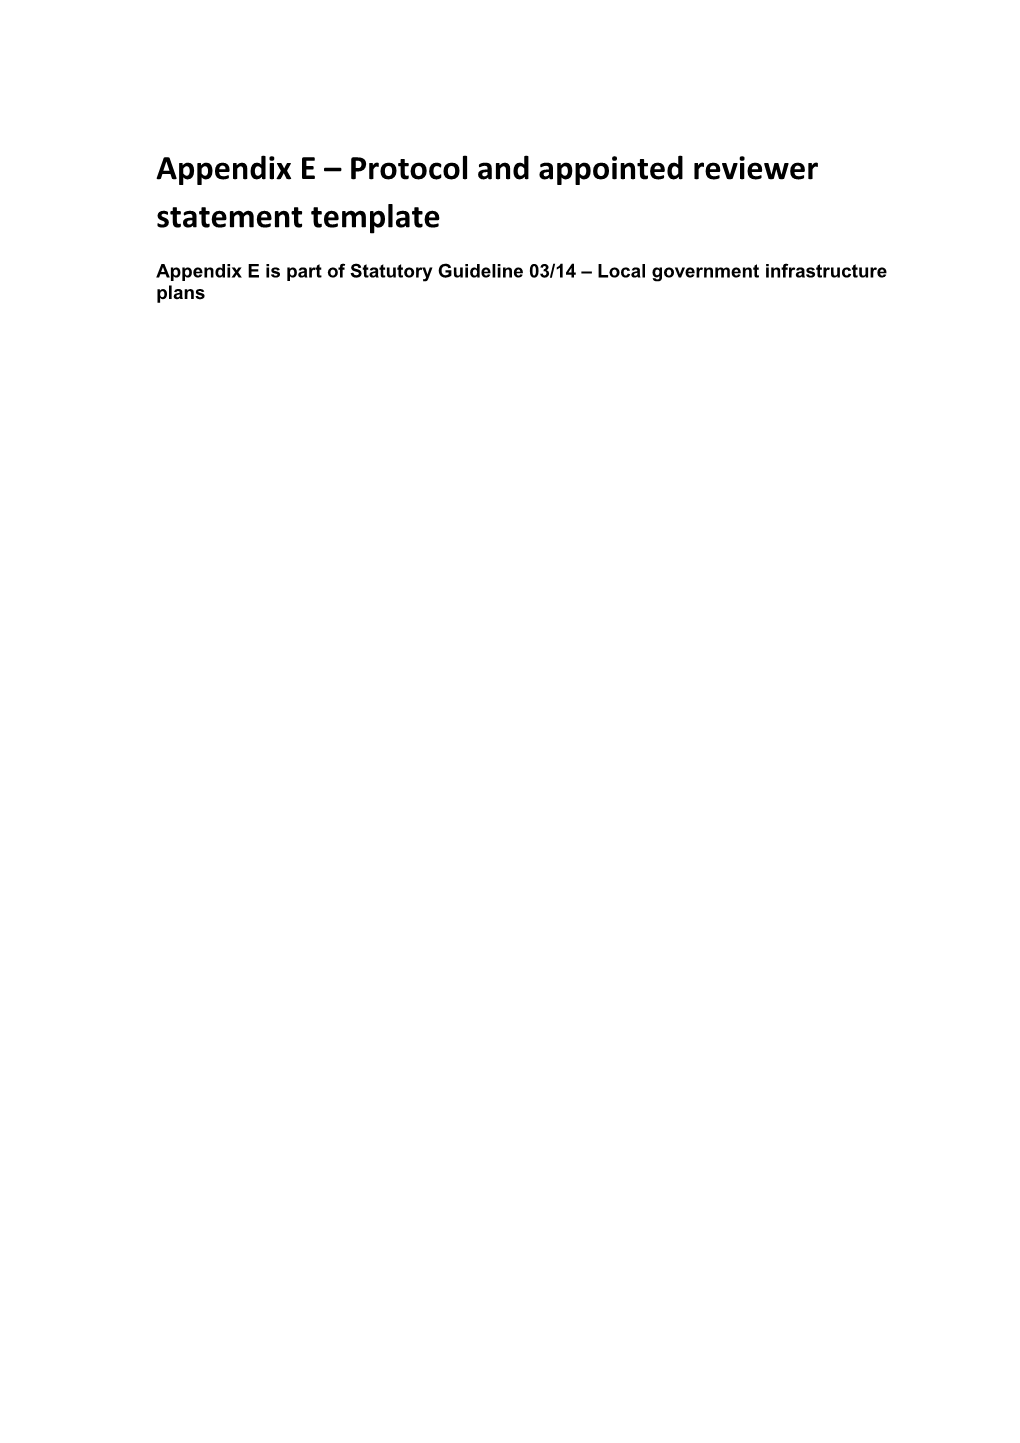 Appendix E Protocol and Appointed Reviewer Statement Template